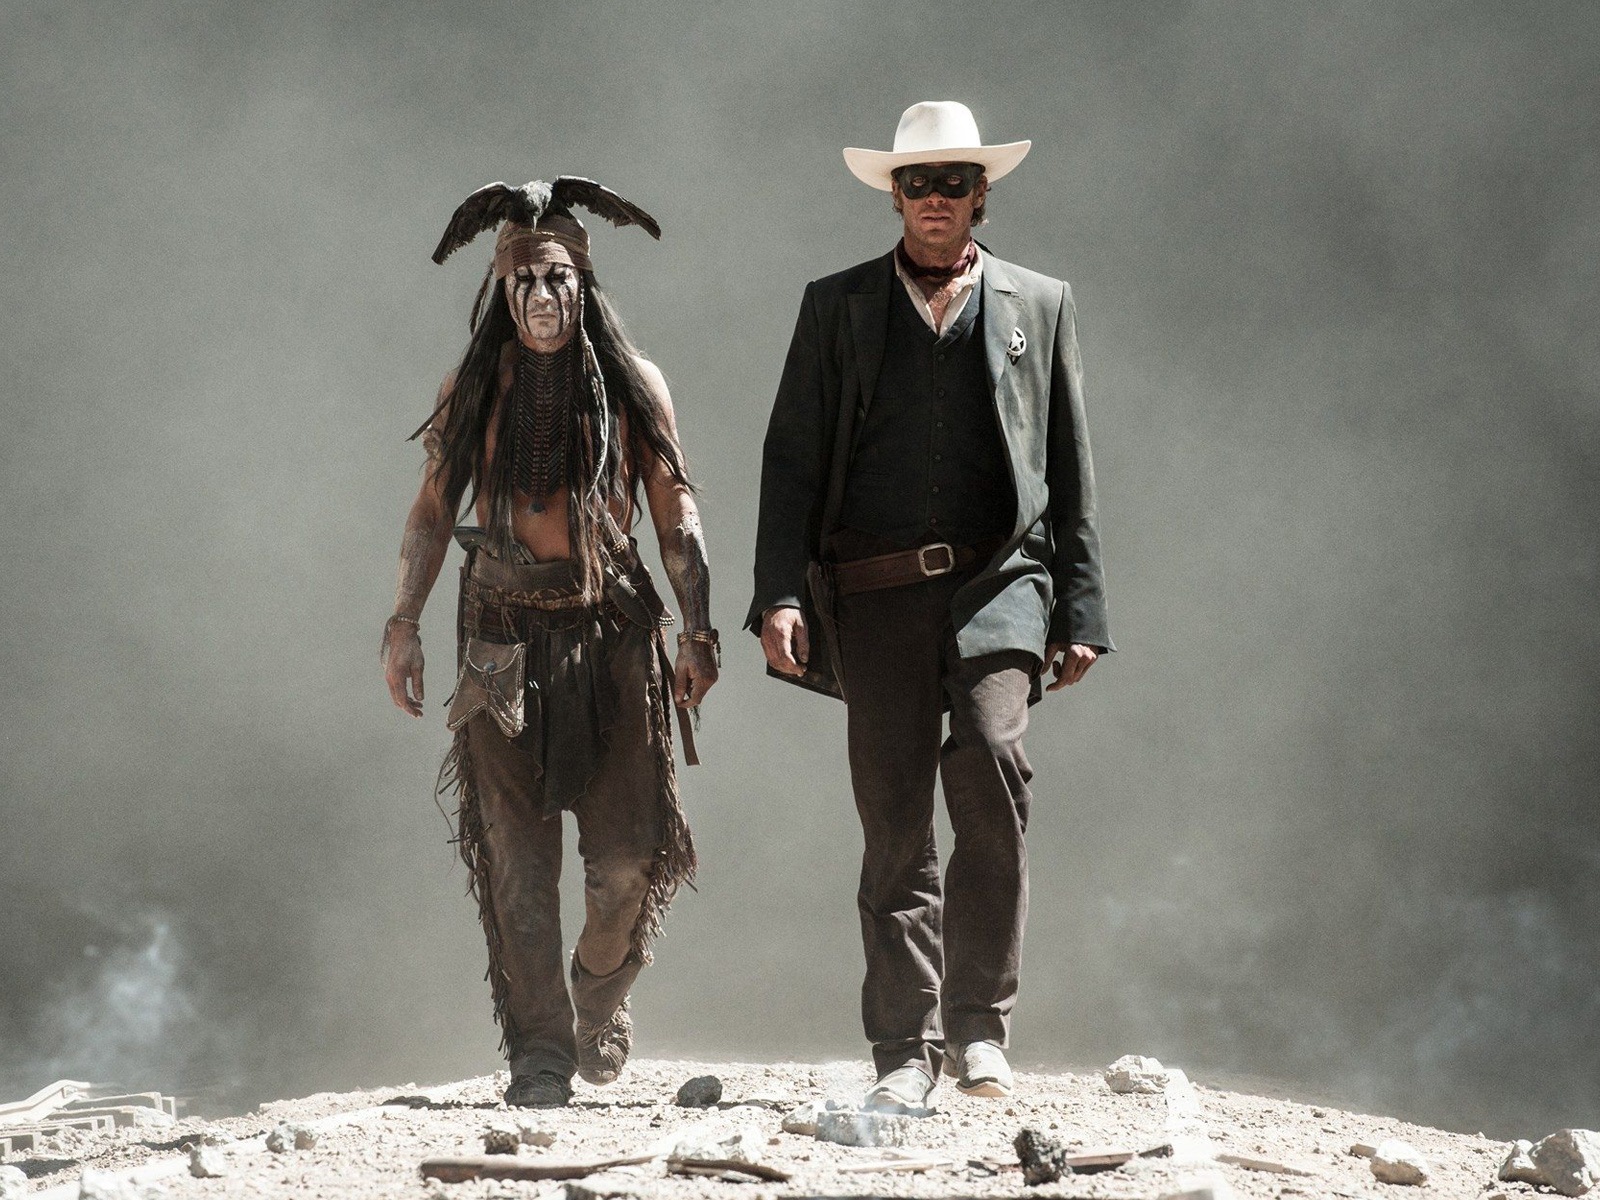 The Lone Ranger HD movie wallpapers #4 - 1600x1200